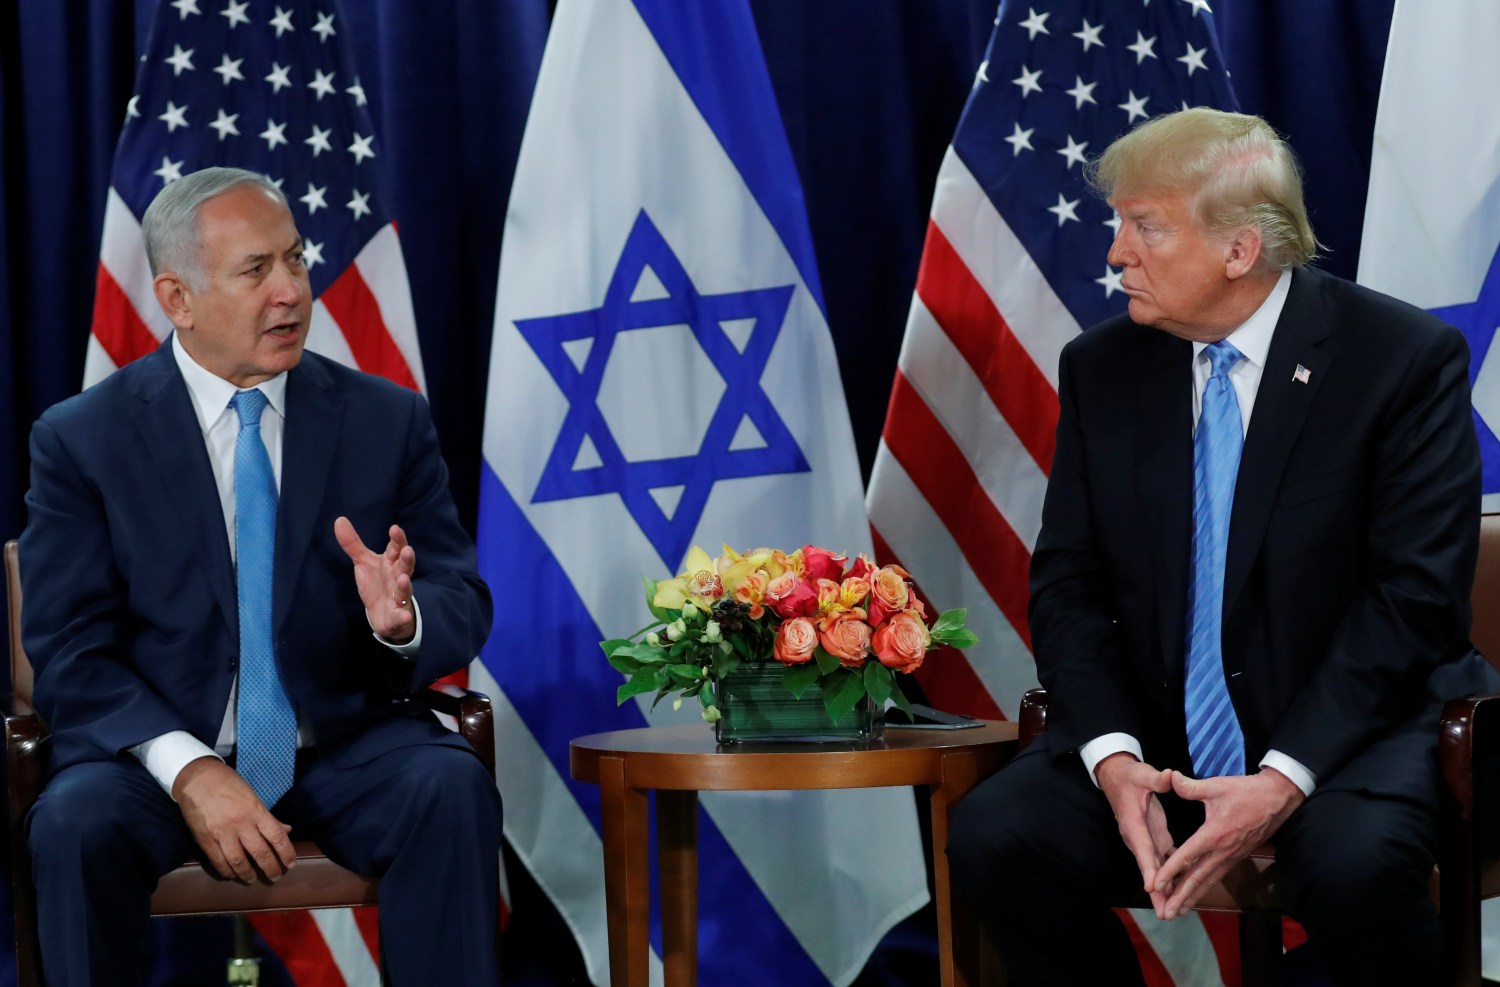 Israeli Prime Minister Benjamin Netanyahu speaks during a bilateral meeting with U.S. President Donald Trump on the sidelines of the 73rd session of the United Nations General Assembly at U.N. headquarters in New York, U.S., September 26, 2018. REUTERS/Carlos Barria - RC185DAD66E0